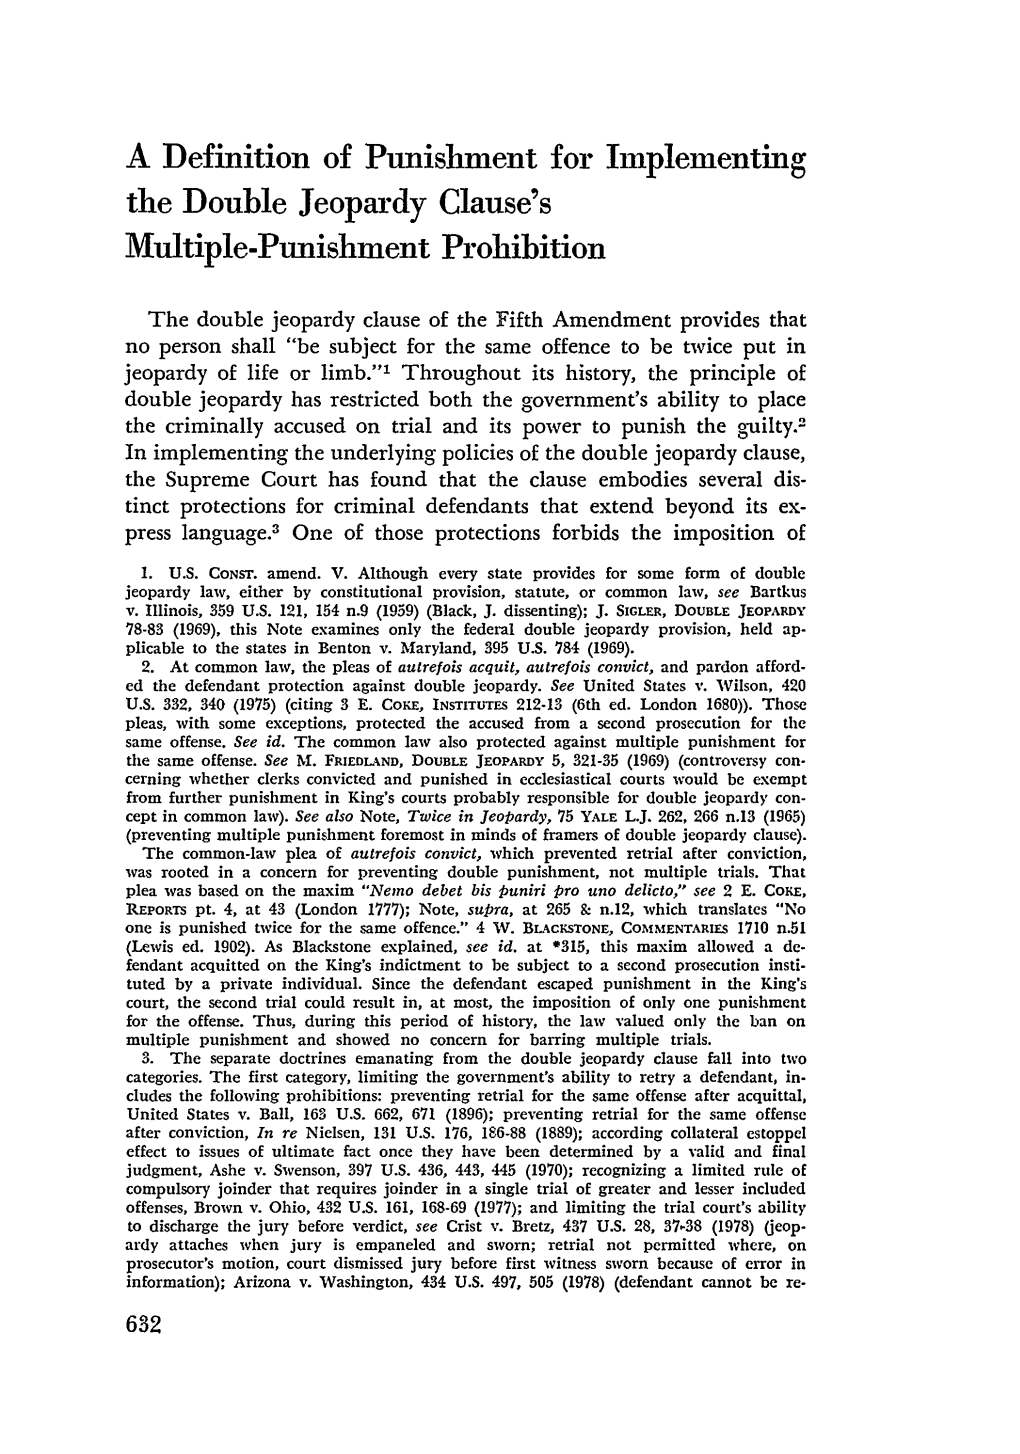 A Definition of Punishment for Implementing the Double Jeopardy Clause's Multiple-Punishment Prohibition